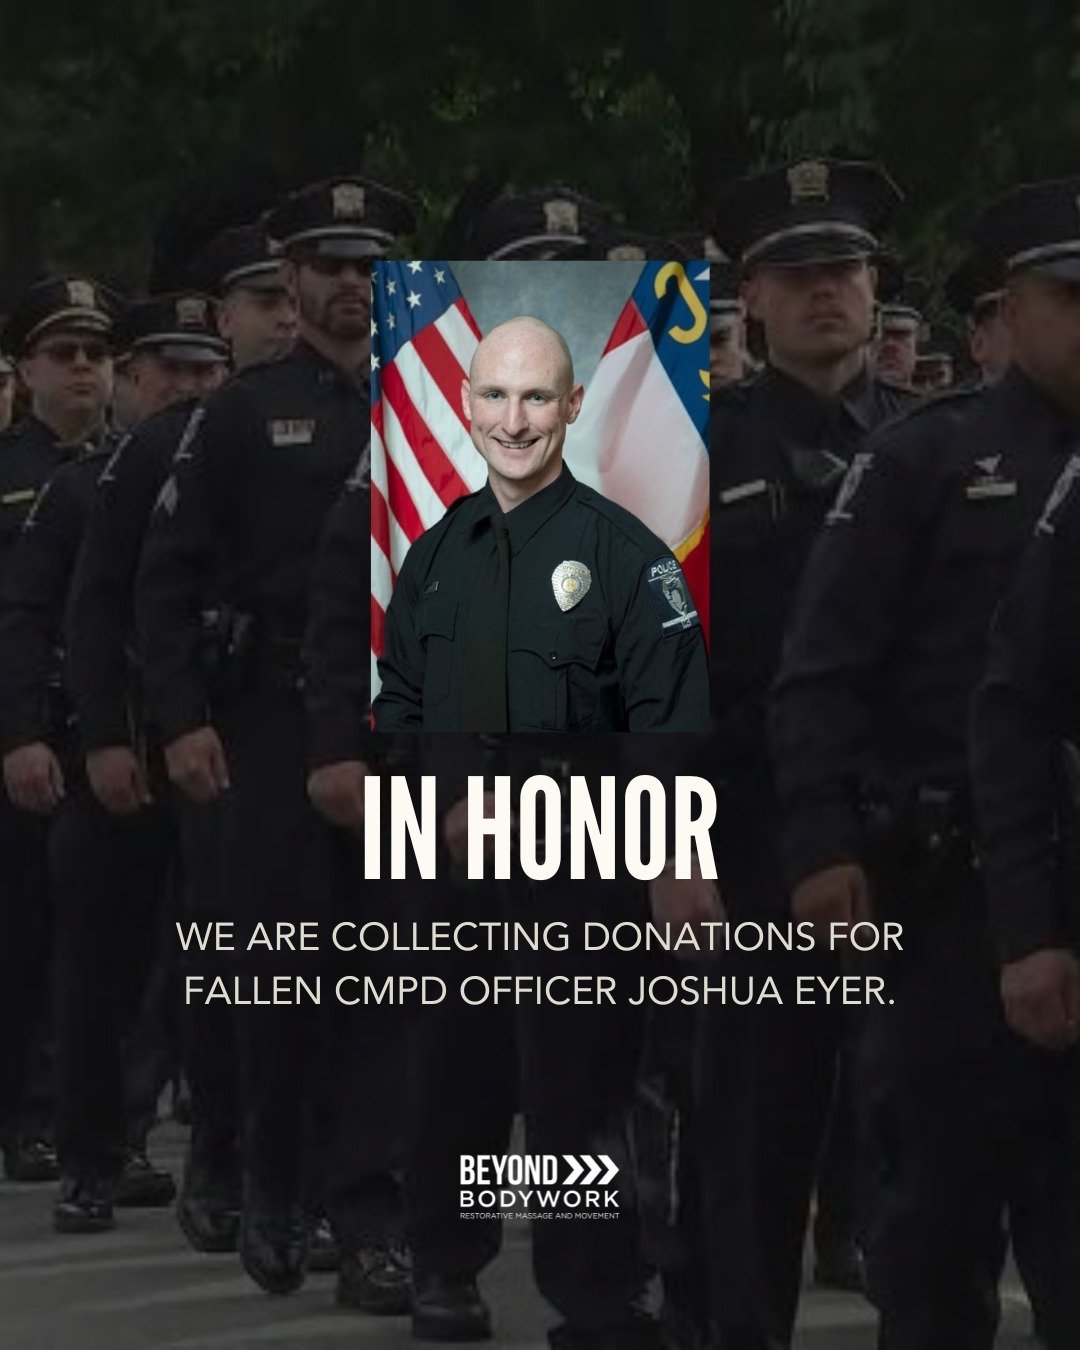 In honor of Officer Joshua Eyer, this week 20% of all proceeds and any donations provided by you are being donated to his family.

We'll be collecting donations starting today through this upcoming Sunday, 5/12. Send us a message to find out more abo